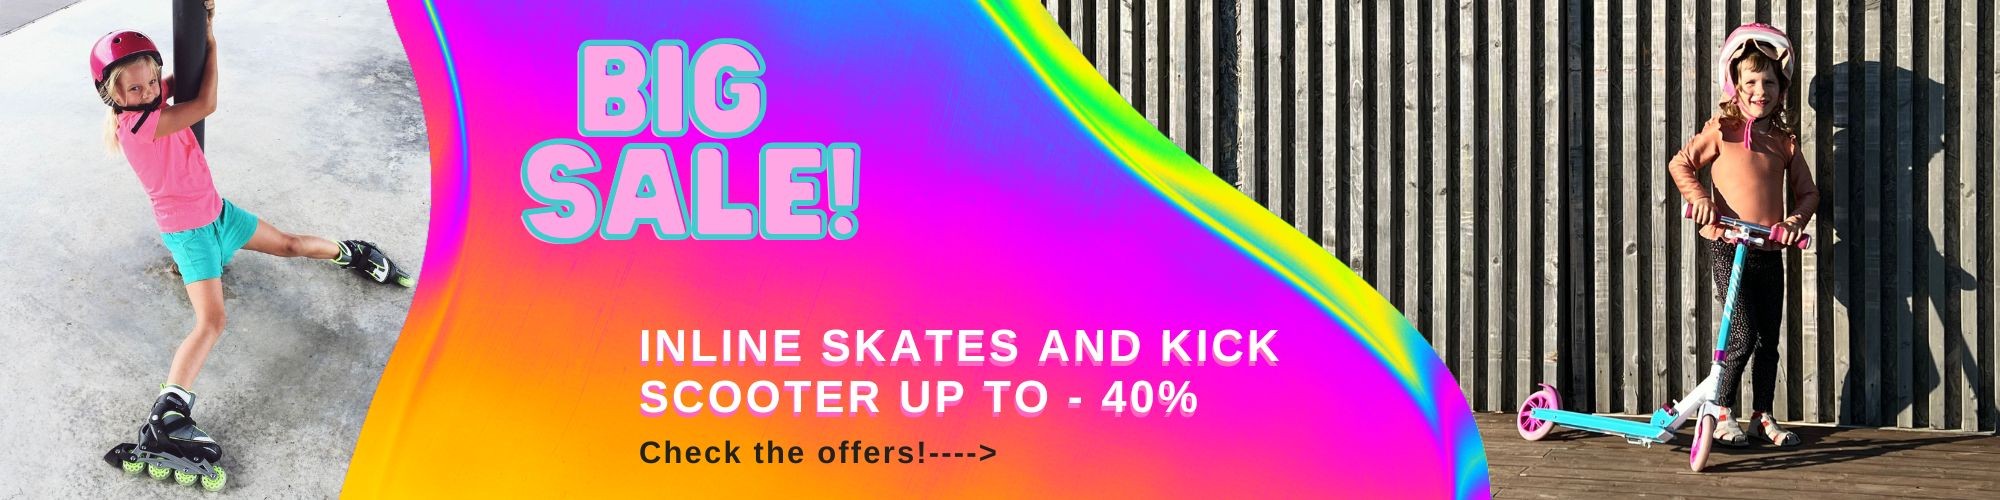 Big deal on scooters and inline skates!